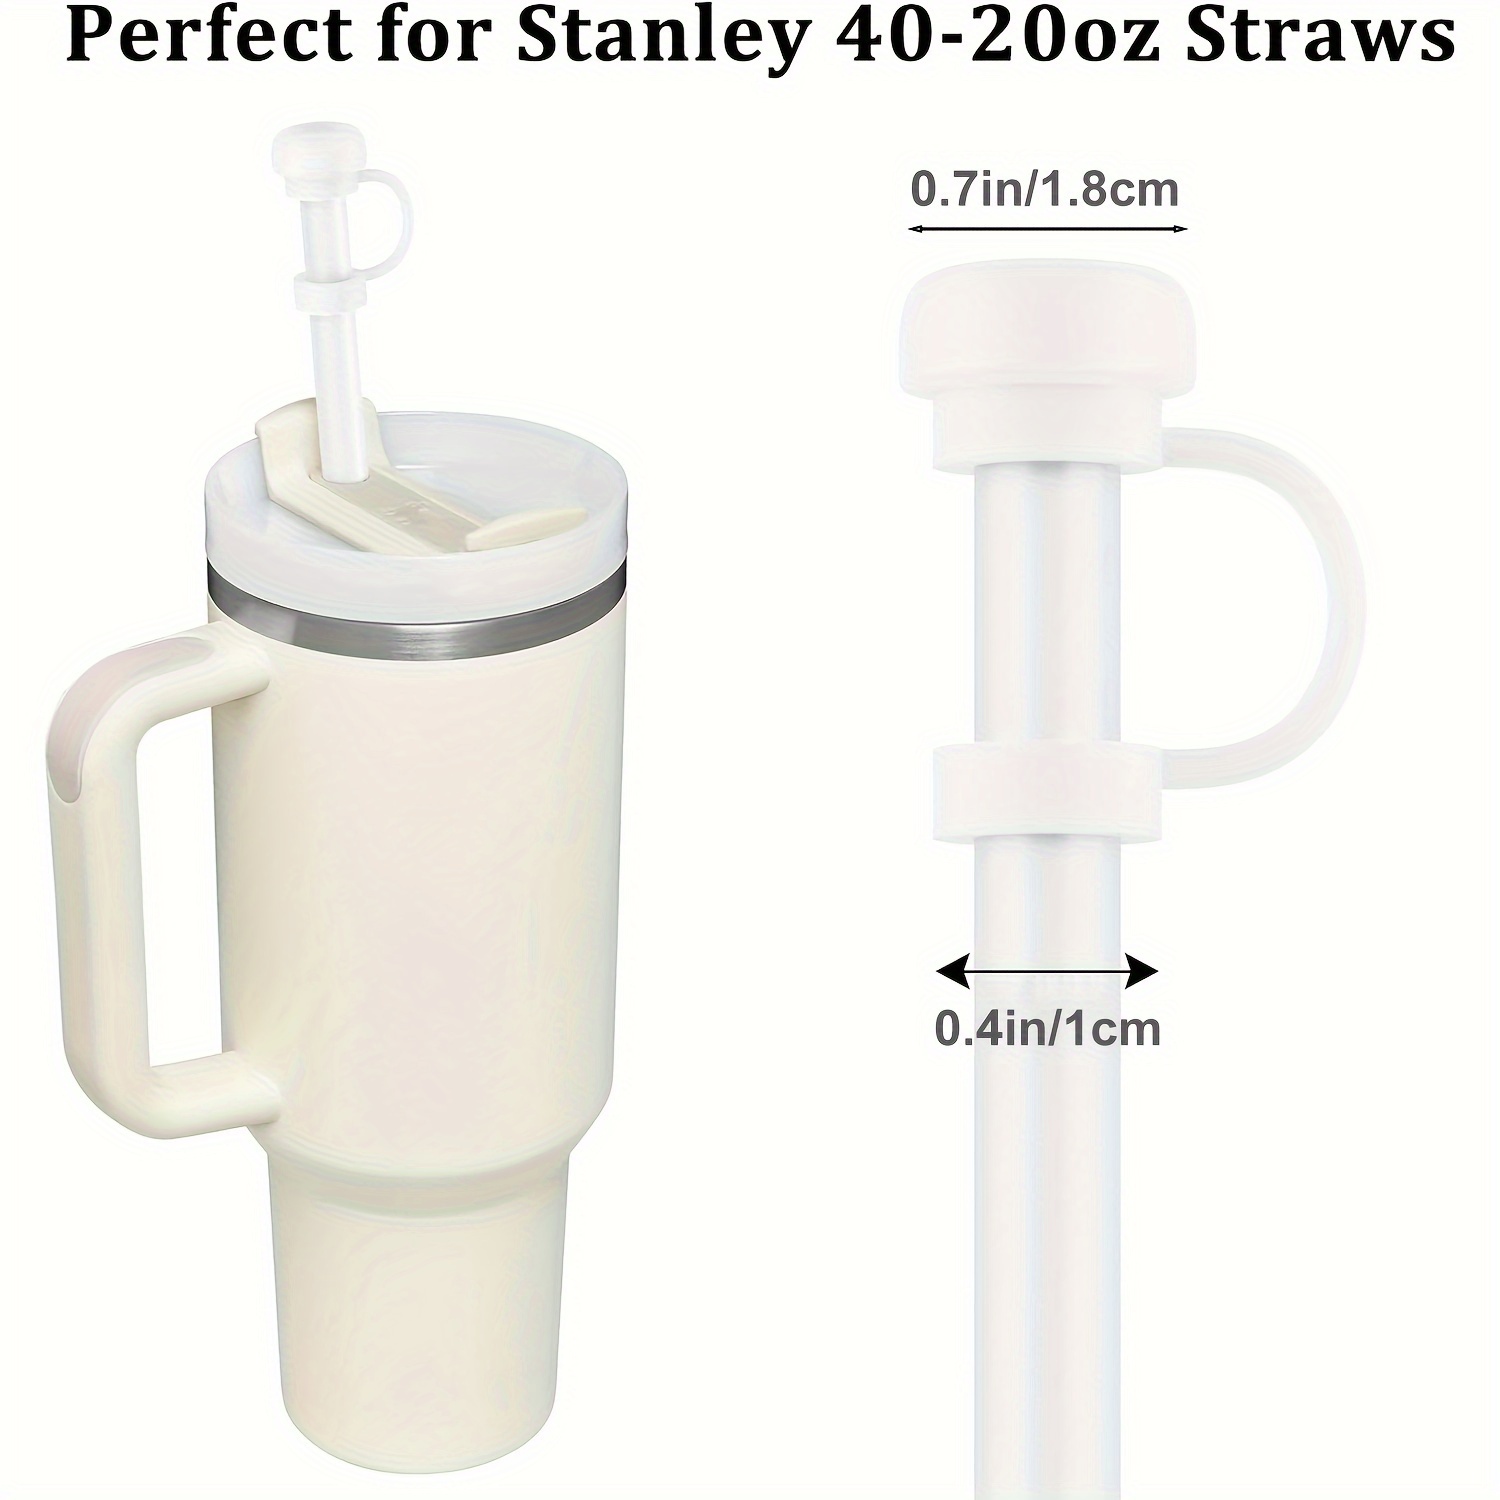 4PCS Straw Covers for Stanley Cup, Silicone Straw Covers Cap for